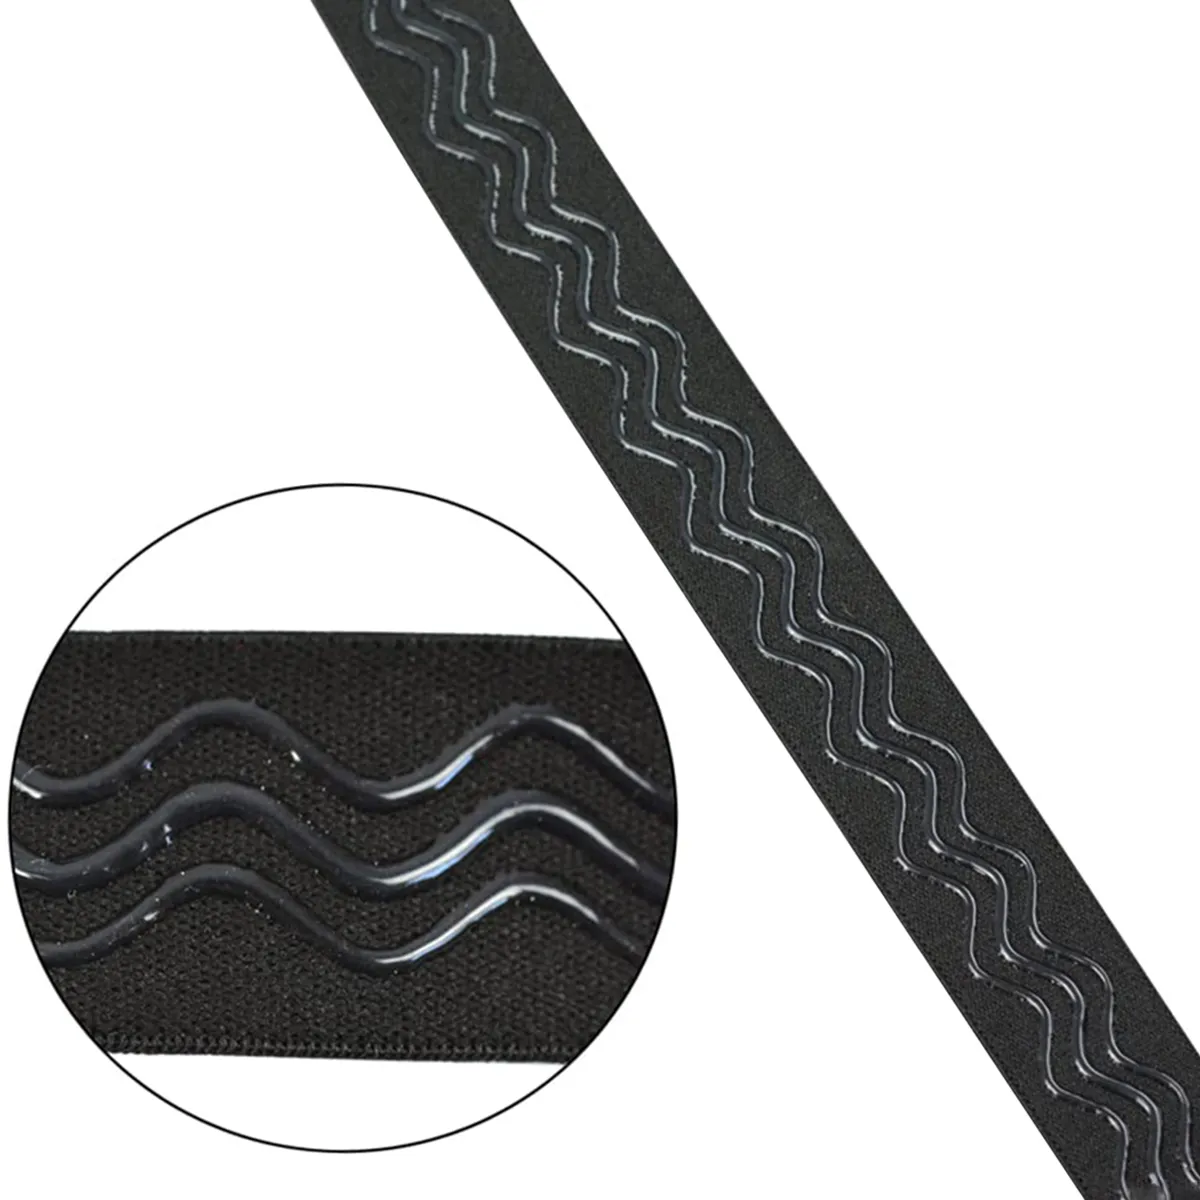 Hair tool Black Elastic Band 3 Yard with Non-Slip Silicone Wigs Making Accessories 1 Inch width